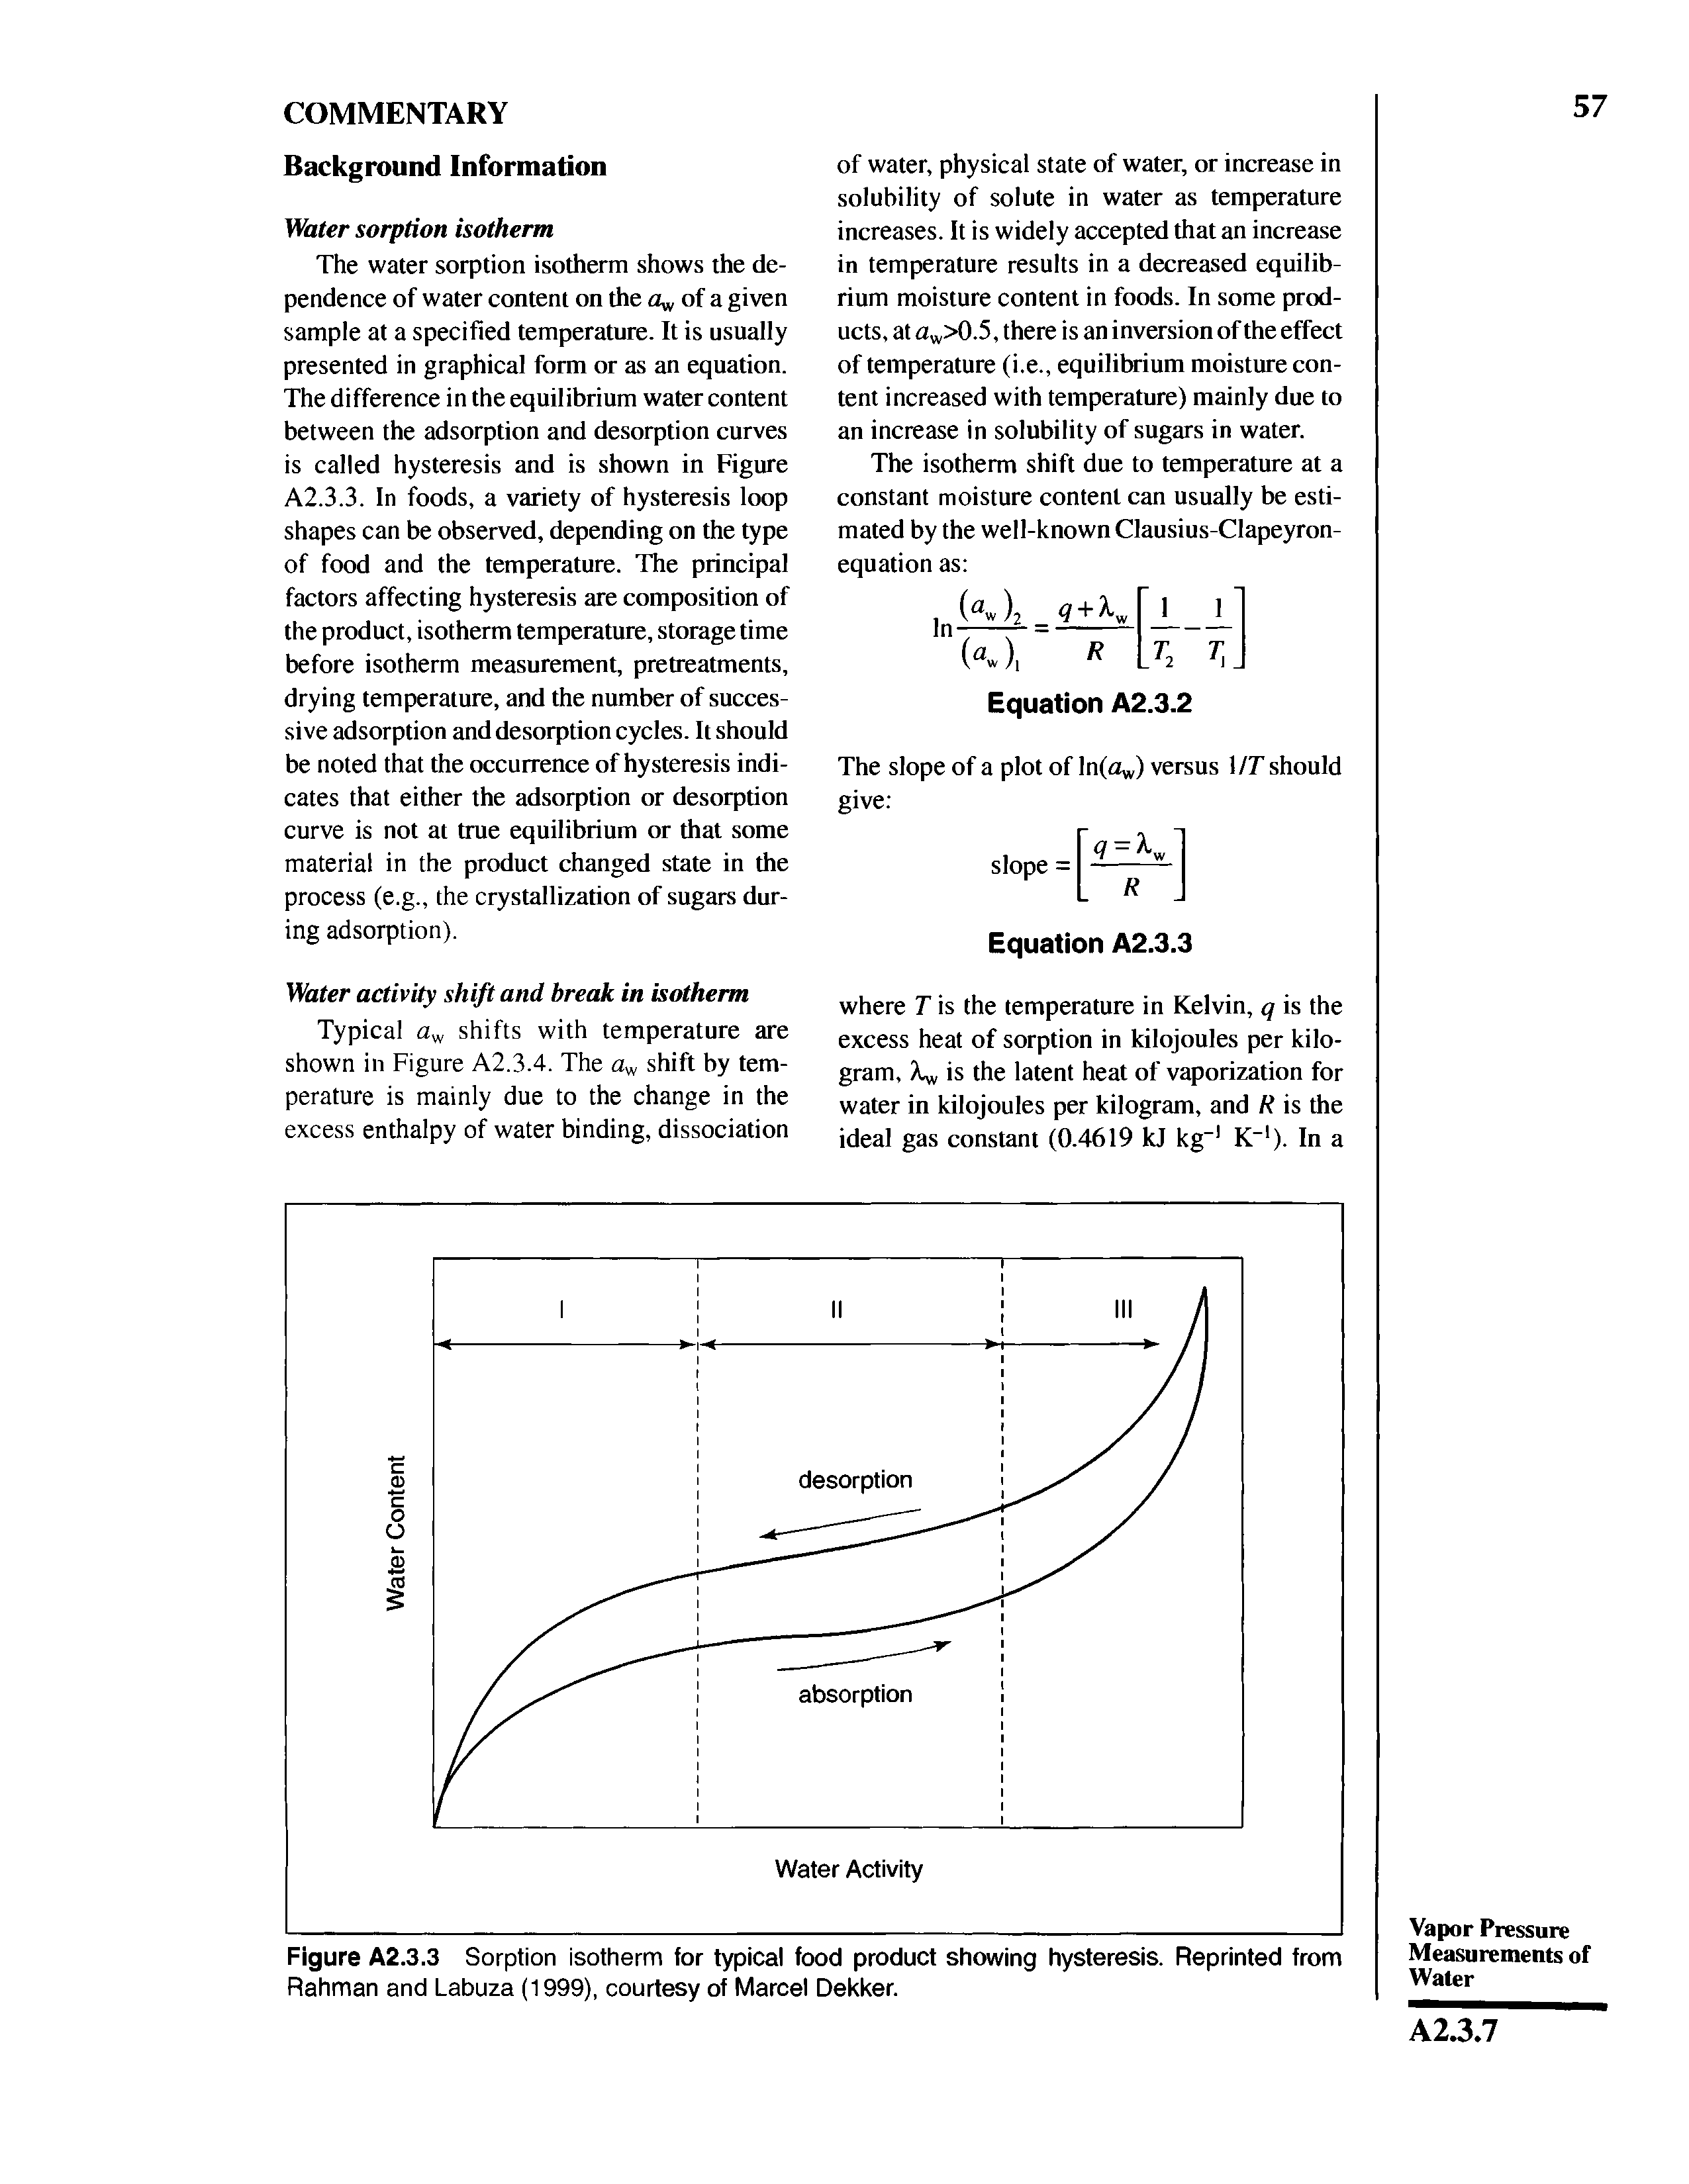 Figure A2.3.3 Sorption isotherm for typical food product showing hysteresis. Reprinted from Rahman and Labuza (1999), courtesy of Marcel Dekker.